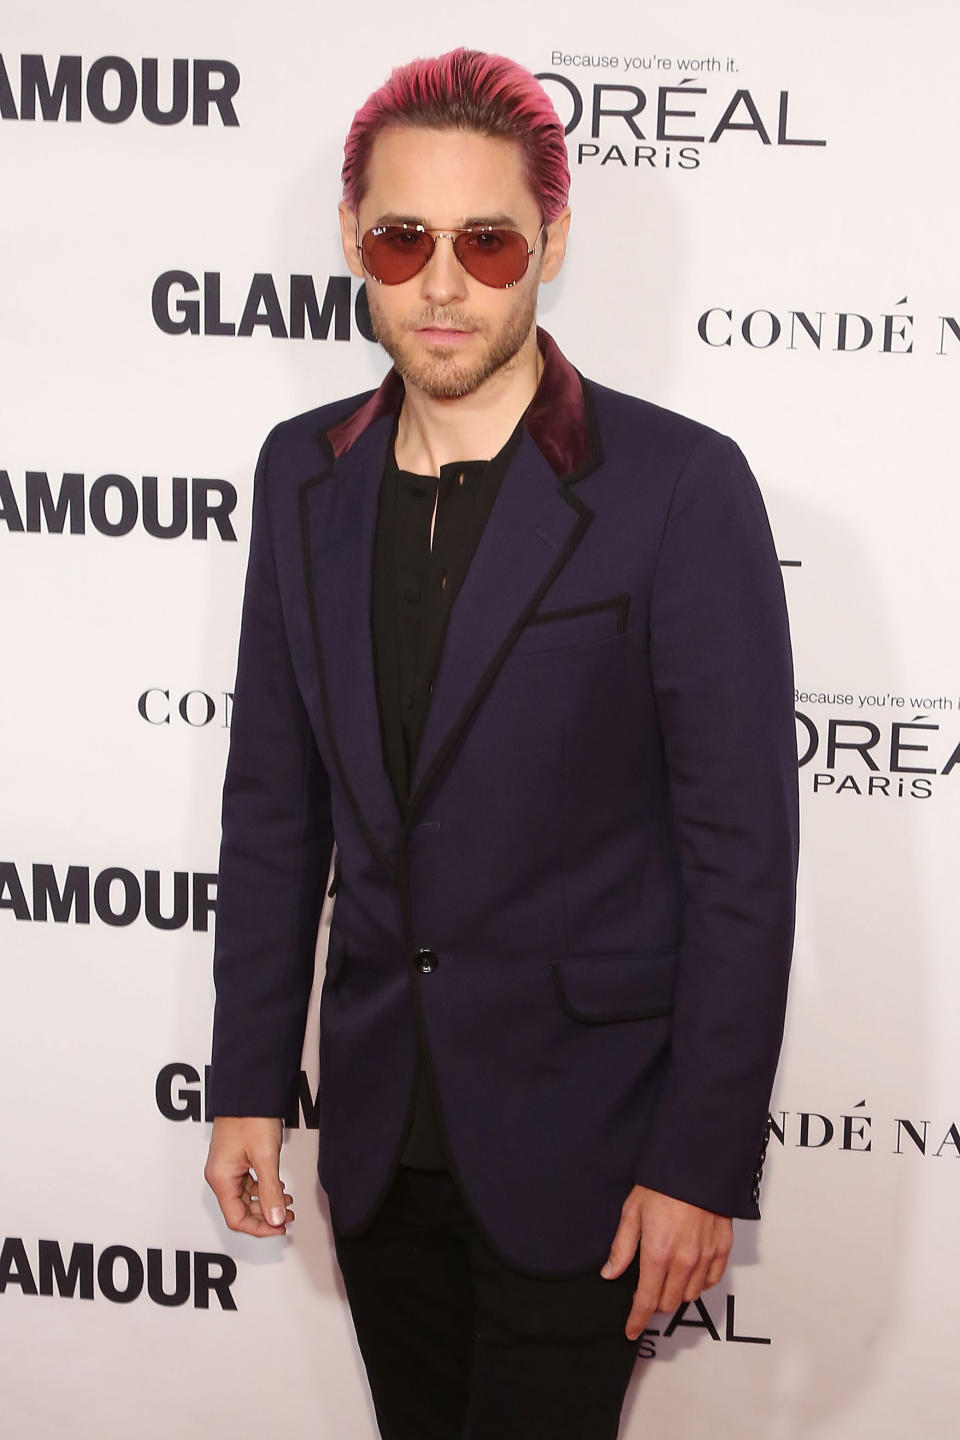 NEW YORK, NY - NOVEMBER 09:  Actor Jared Leto attends Glamour's 25th Anniversary Women Of The Year Awards at Carnegie Hall on November 9, 2015 in New York City.  (Photo by Taylor Hill/Getty Images)